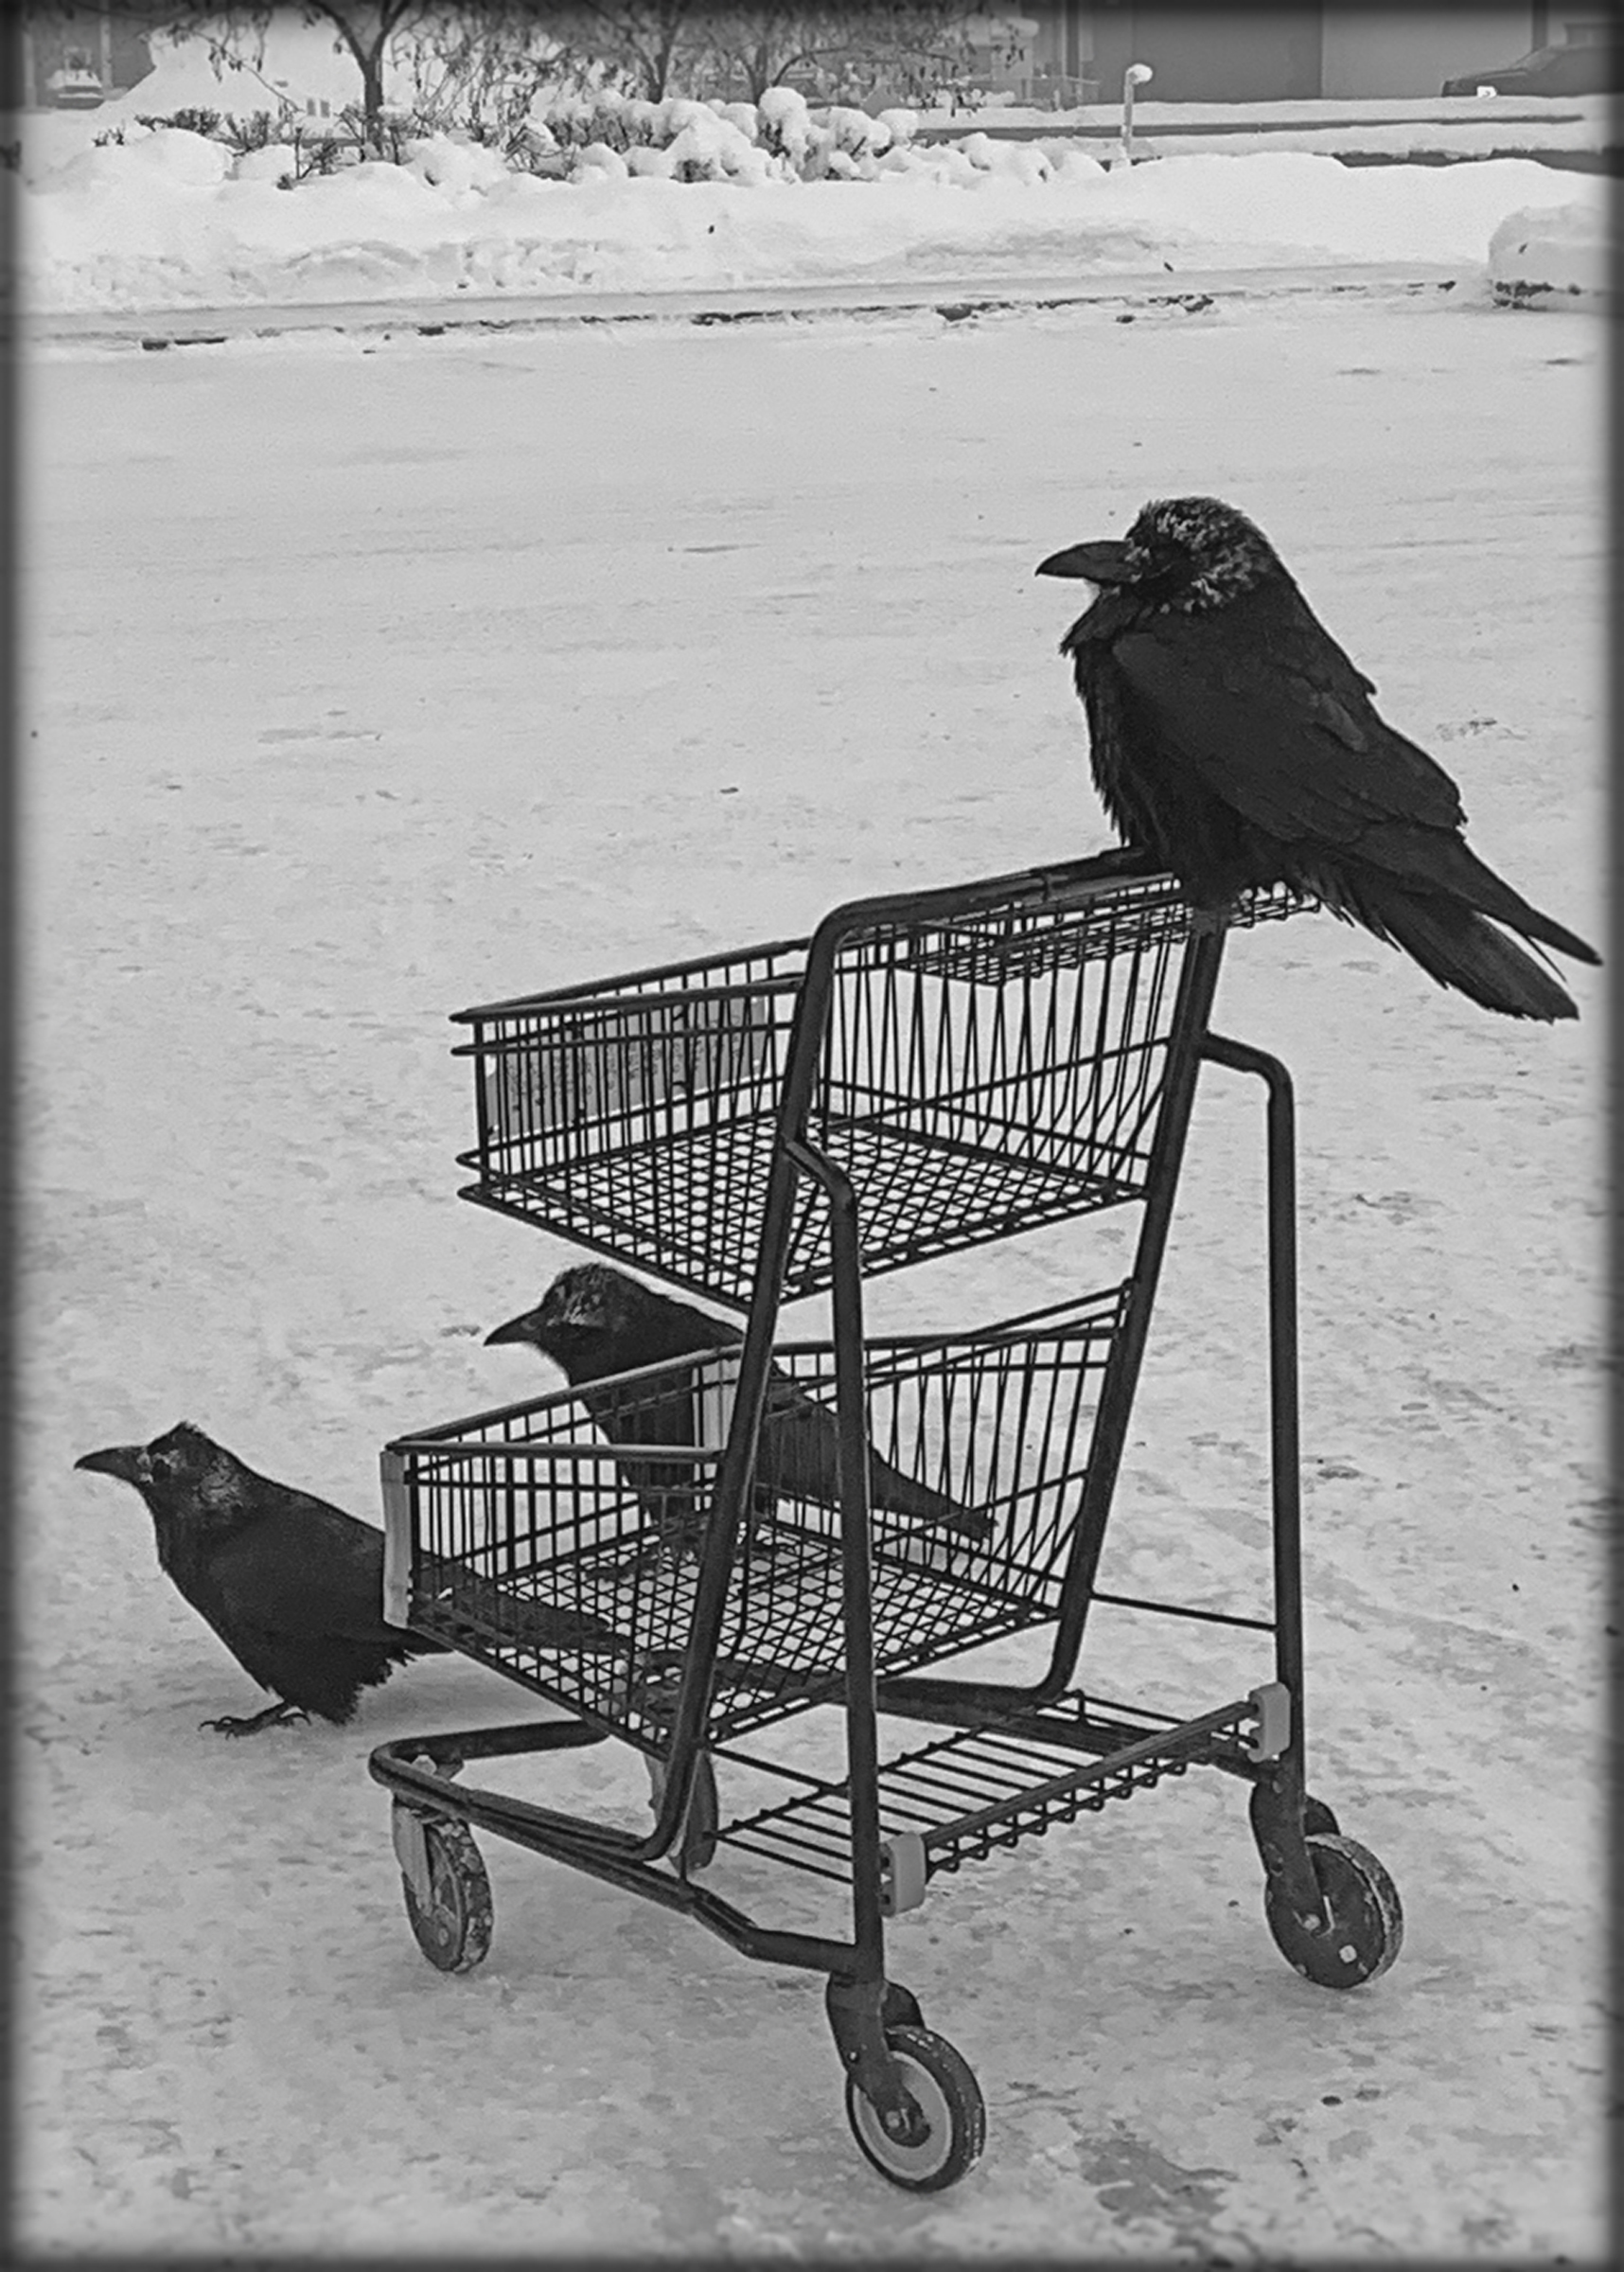 a raven sits on the handle of a small shopping cart in a snowy parking lot, with two more ravens on the ground beside it